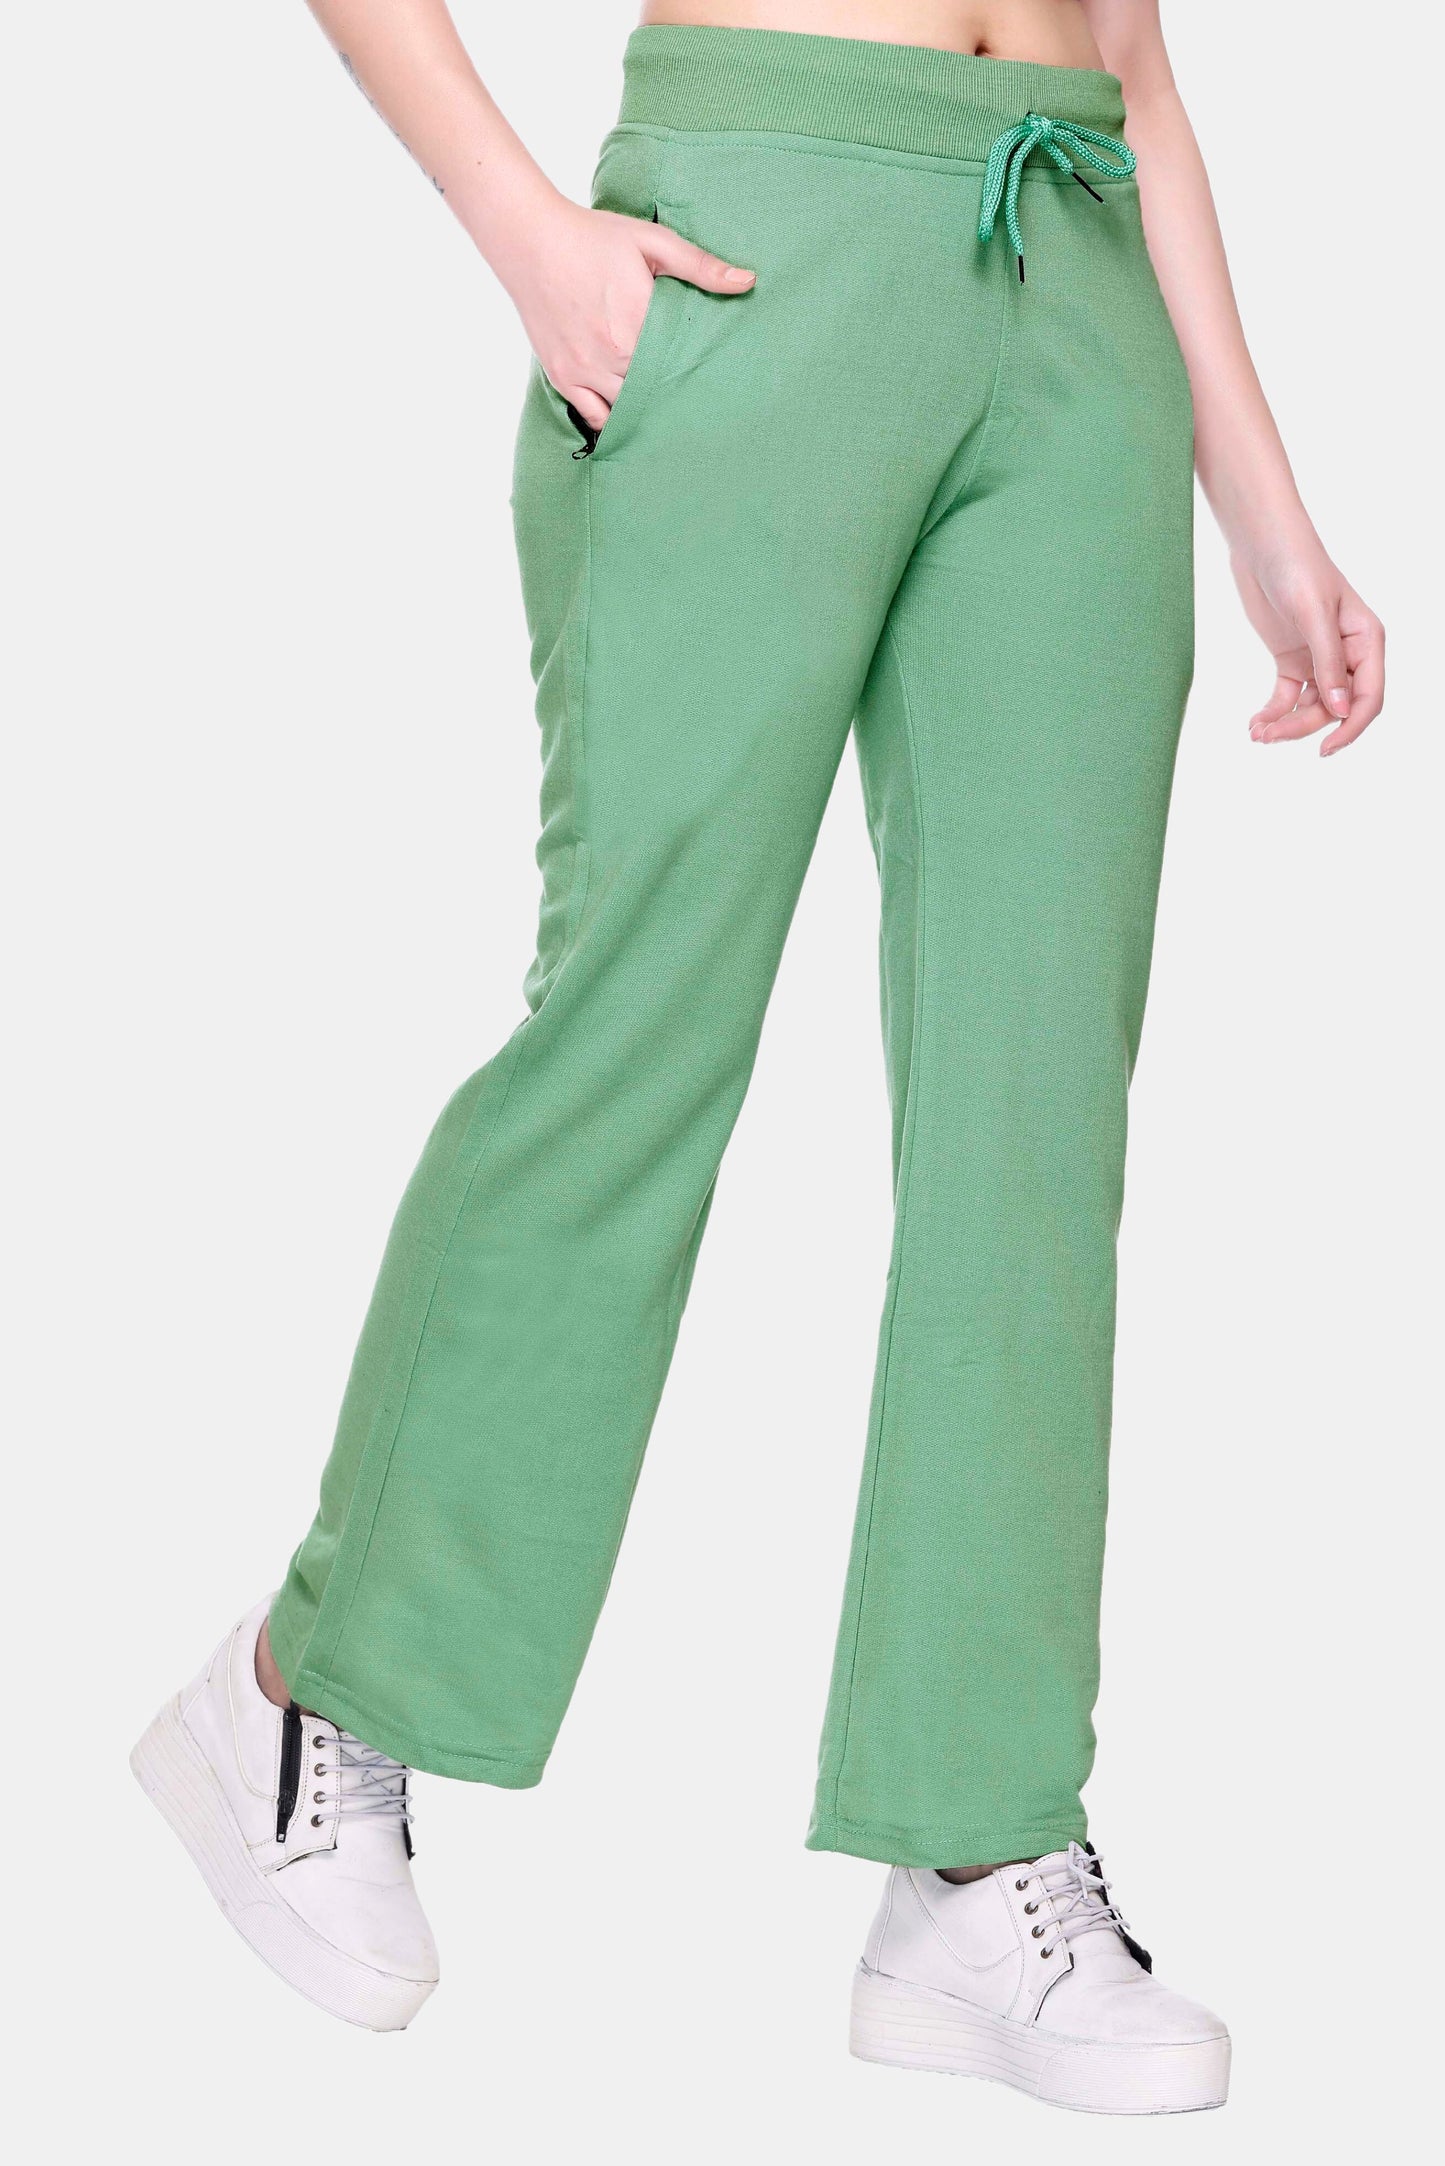 White Moon  Women Solid C-Green Bootcut Track Pants